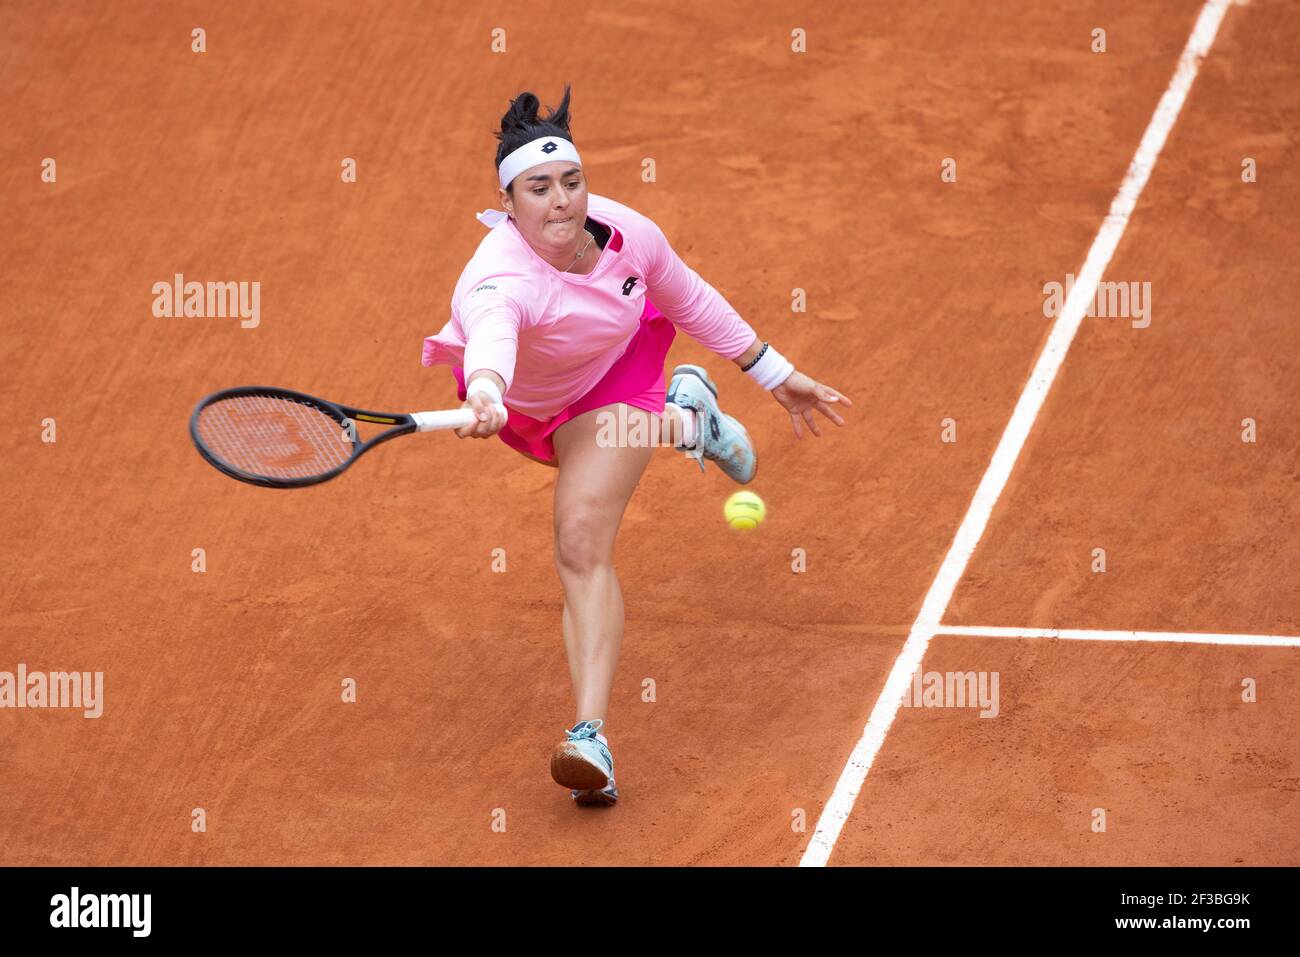 Tunesian tennis player Ons Jabeur playing a forehand shot during French Open 2020, Paris, France, Europe. Stock Photo